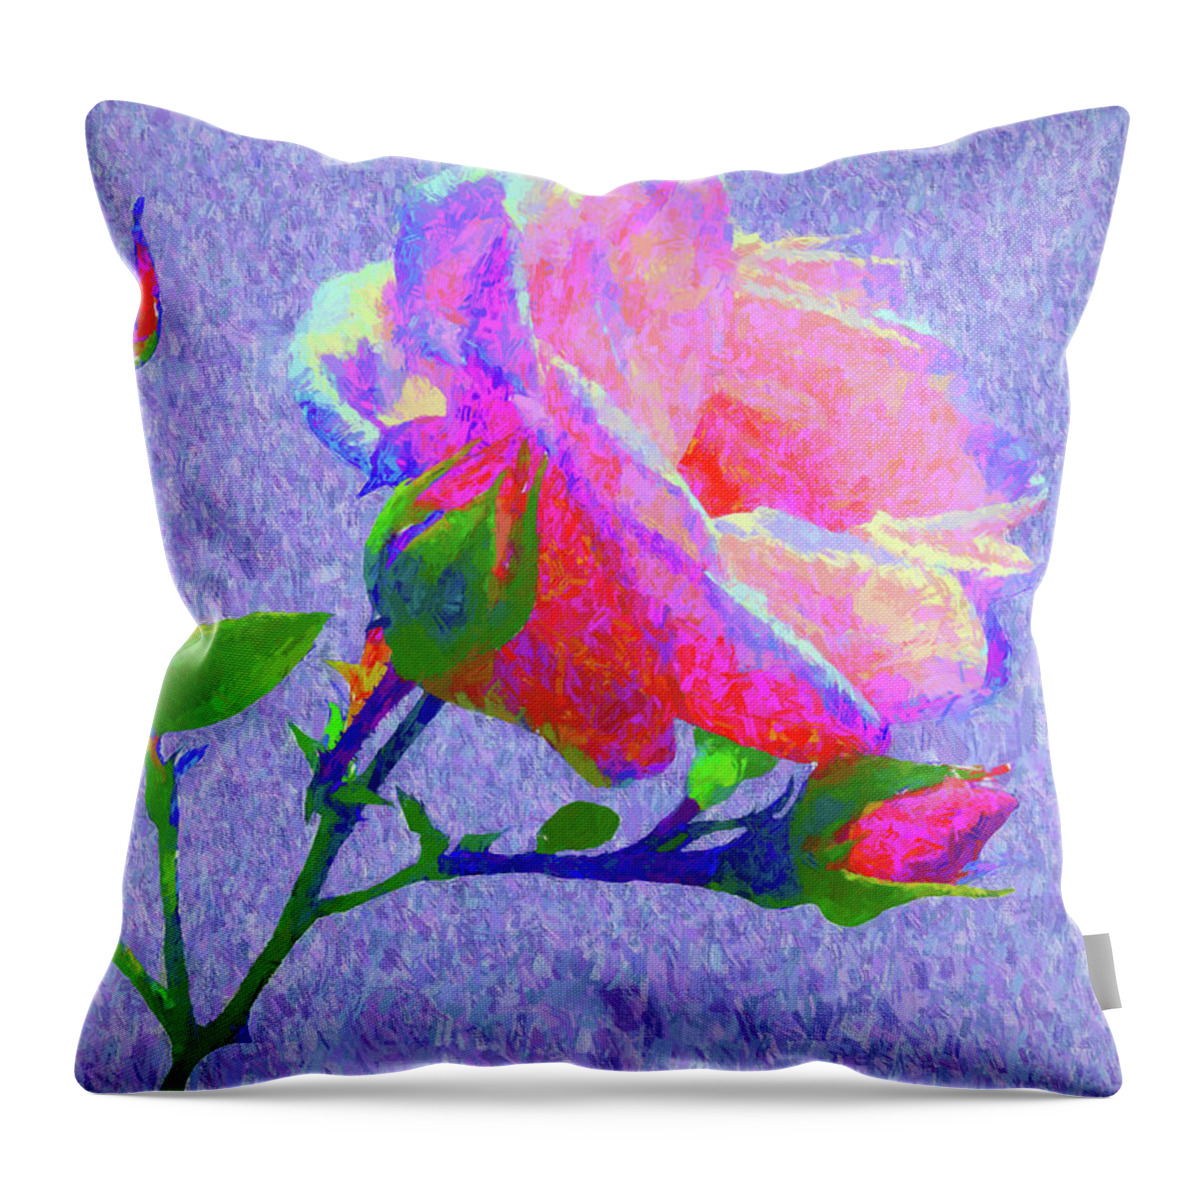 Floral Throw Pillow featuring the digital art New Dawn Painterly by Susan Lafleur